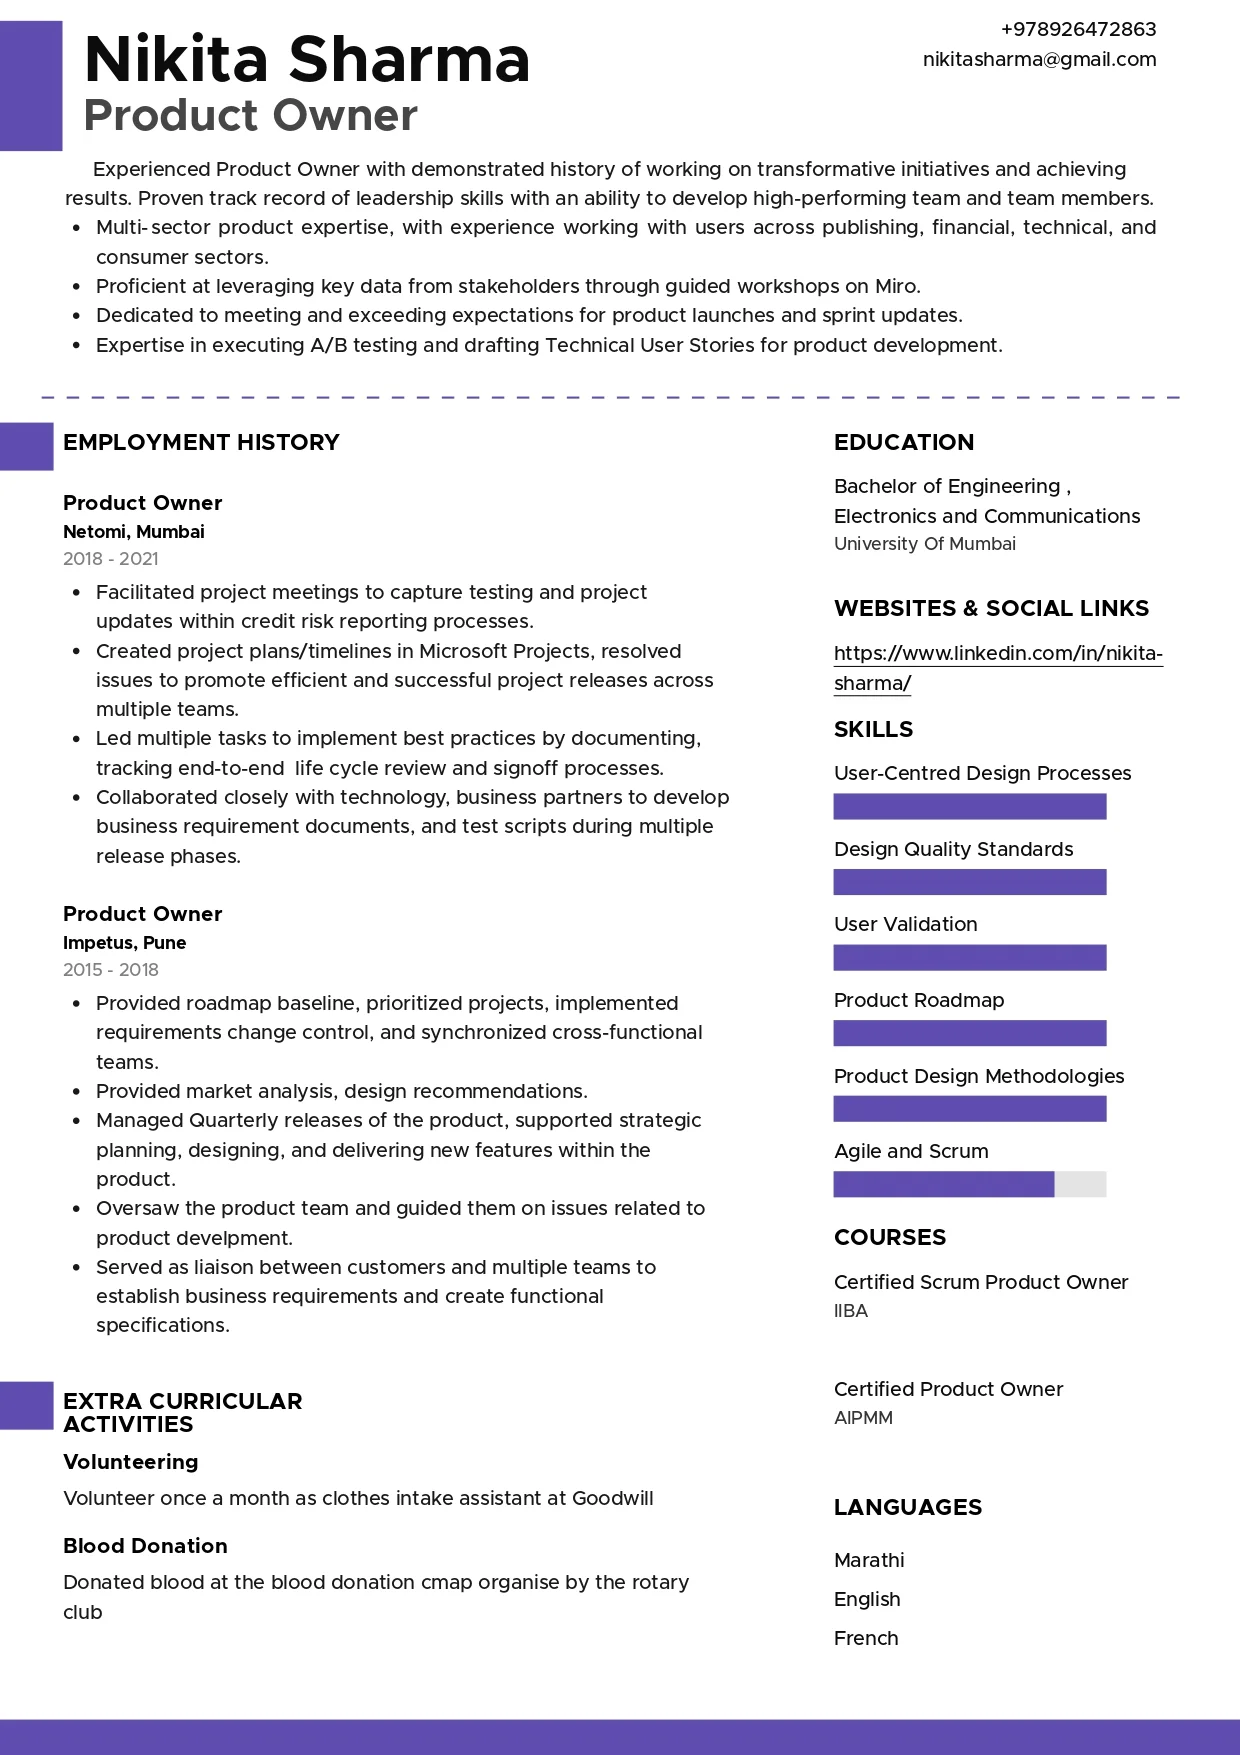 Sample Resume of Product Owner | Free Resume Templates & Samples on Resumod.co